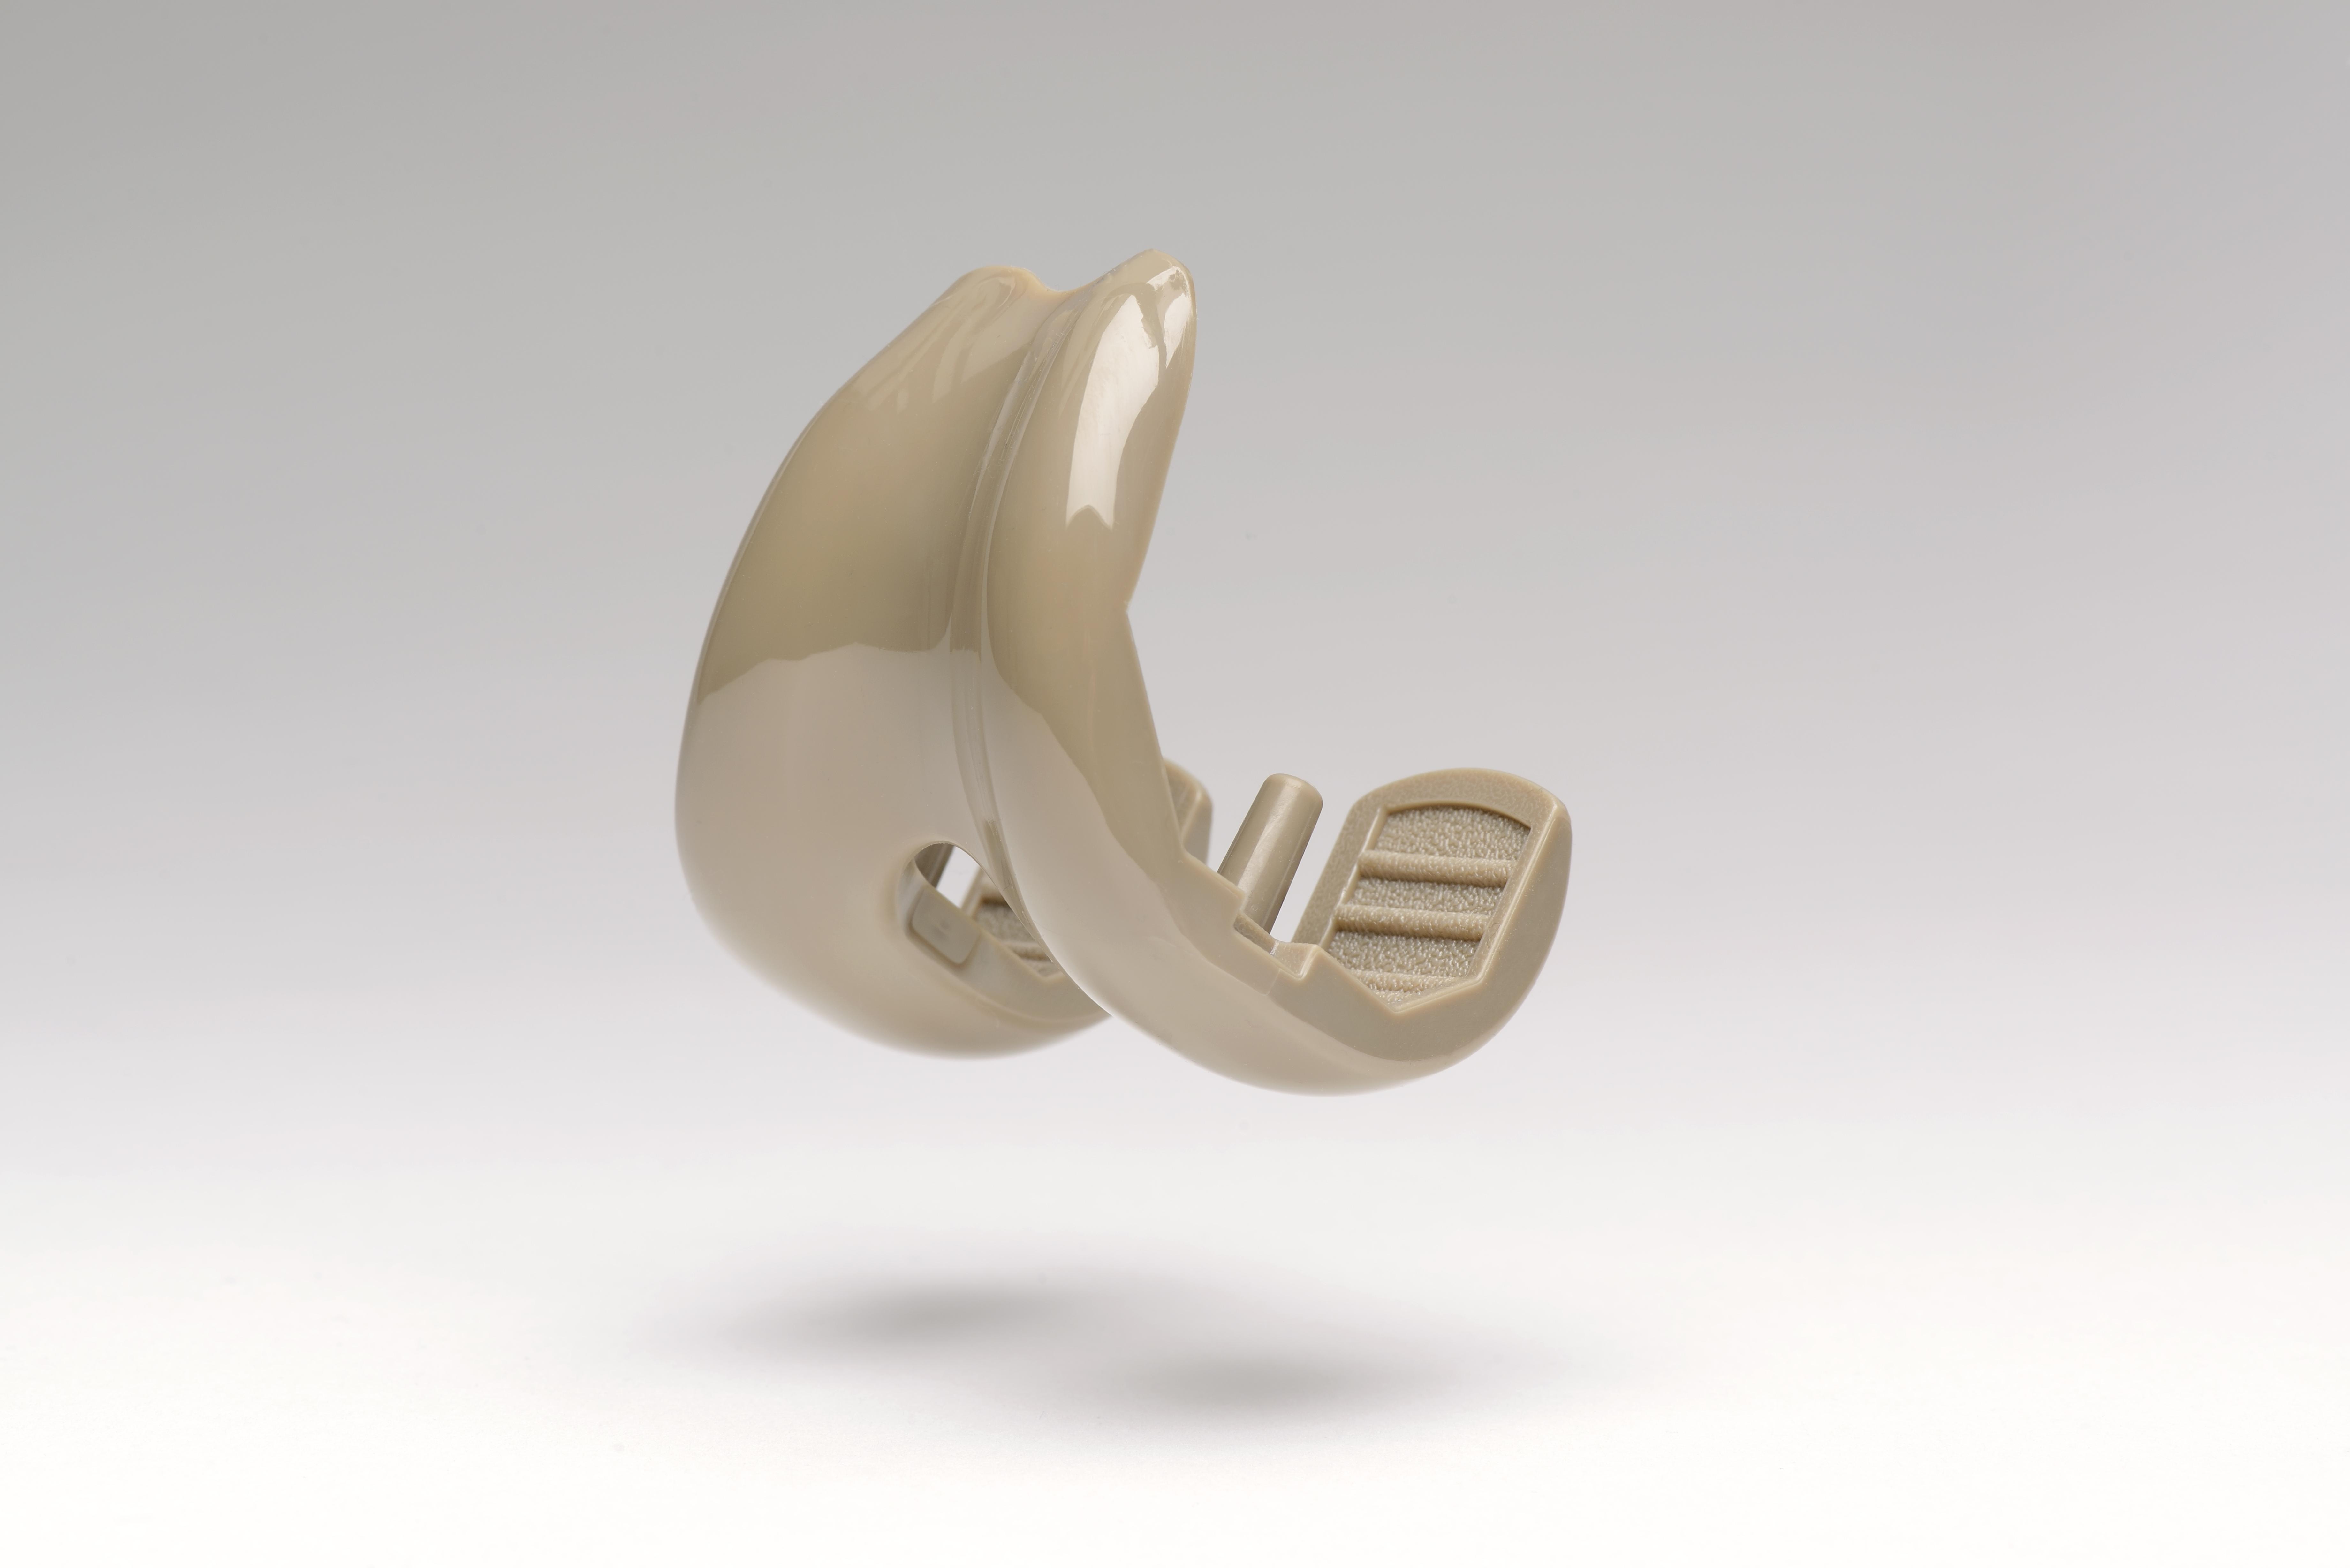 A visualisation of a polymer knee joint.